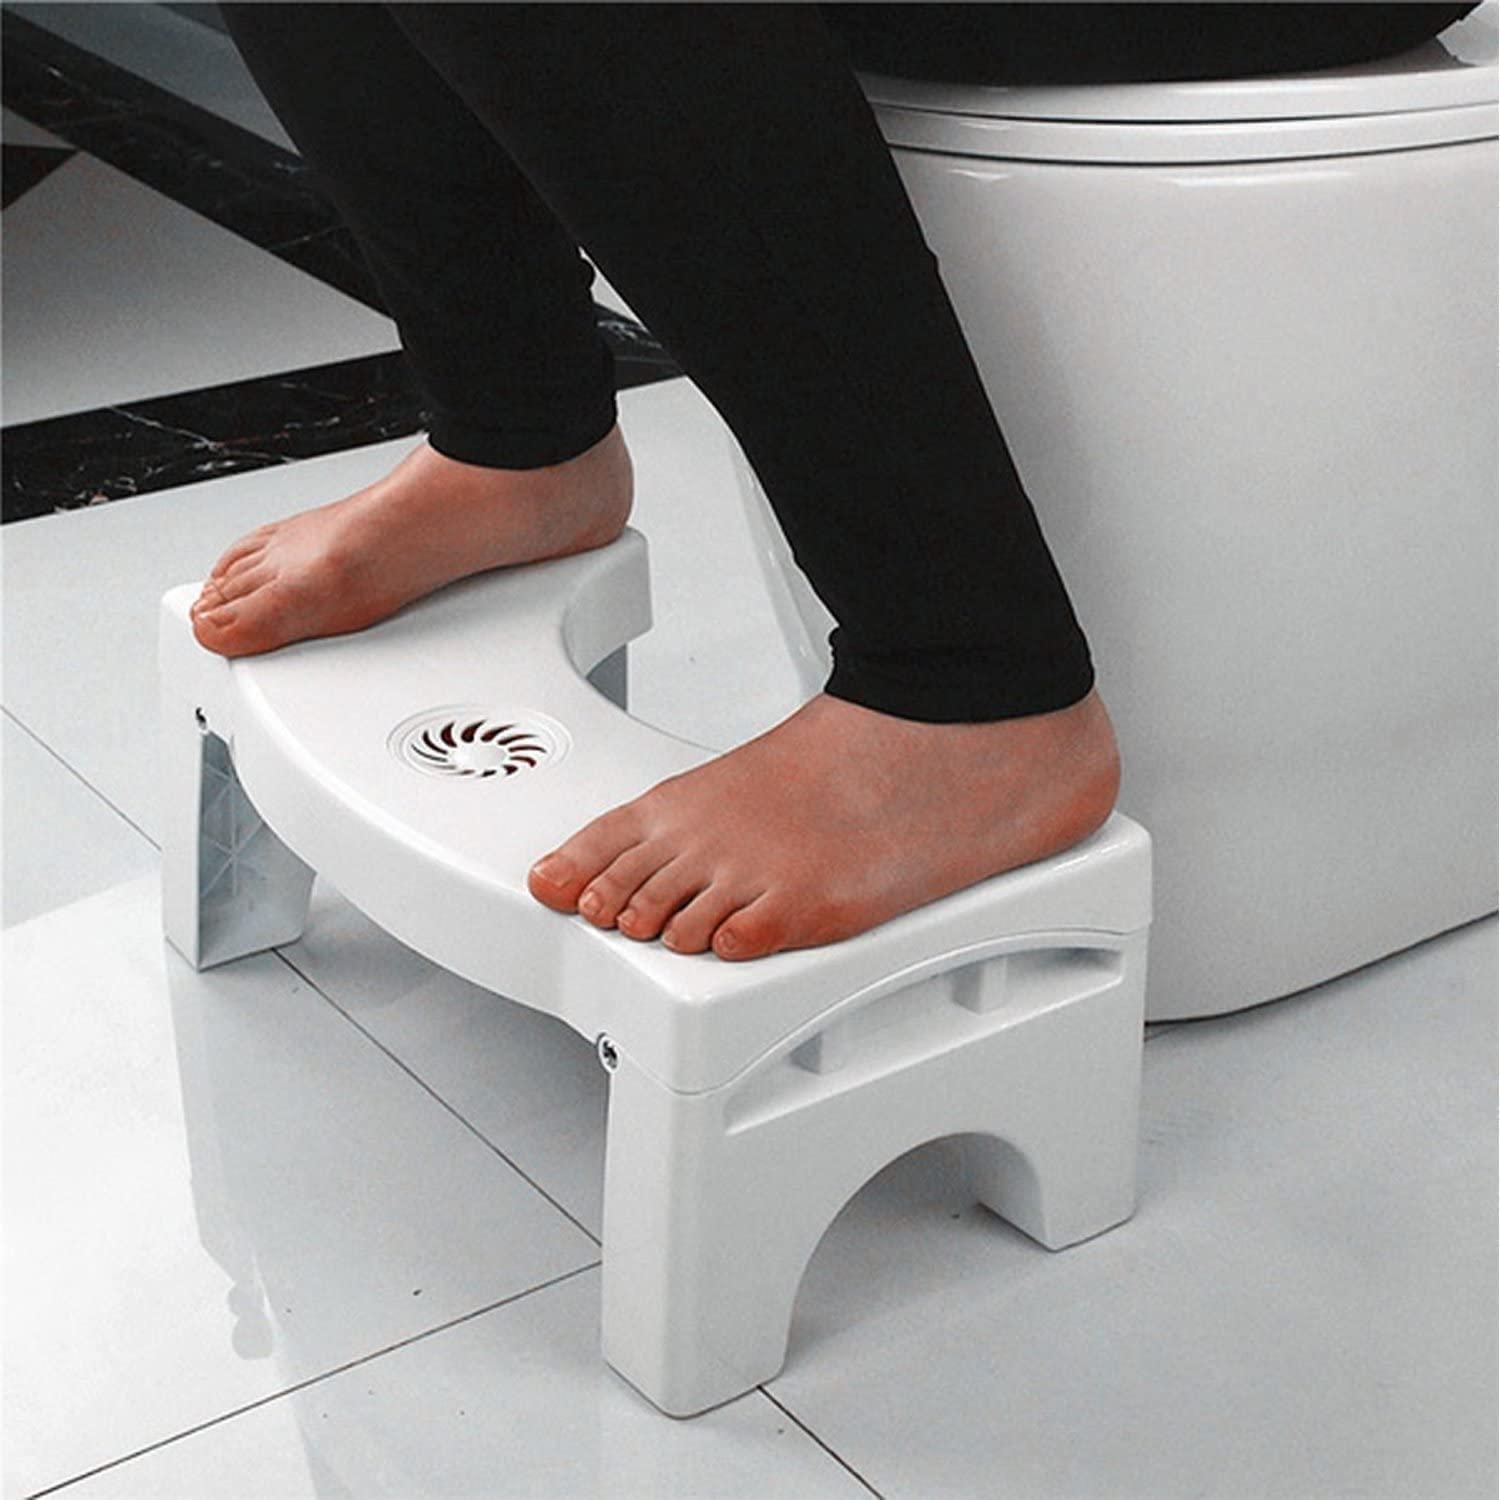 Foldable Plastic Potty Training Stool: Anti-Constipation with Air Freshener Slot